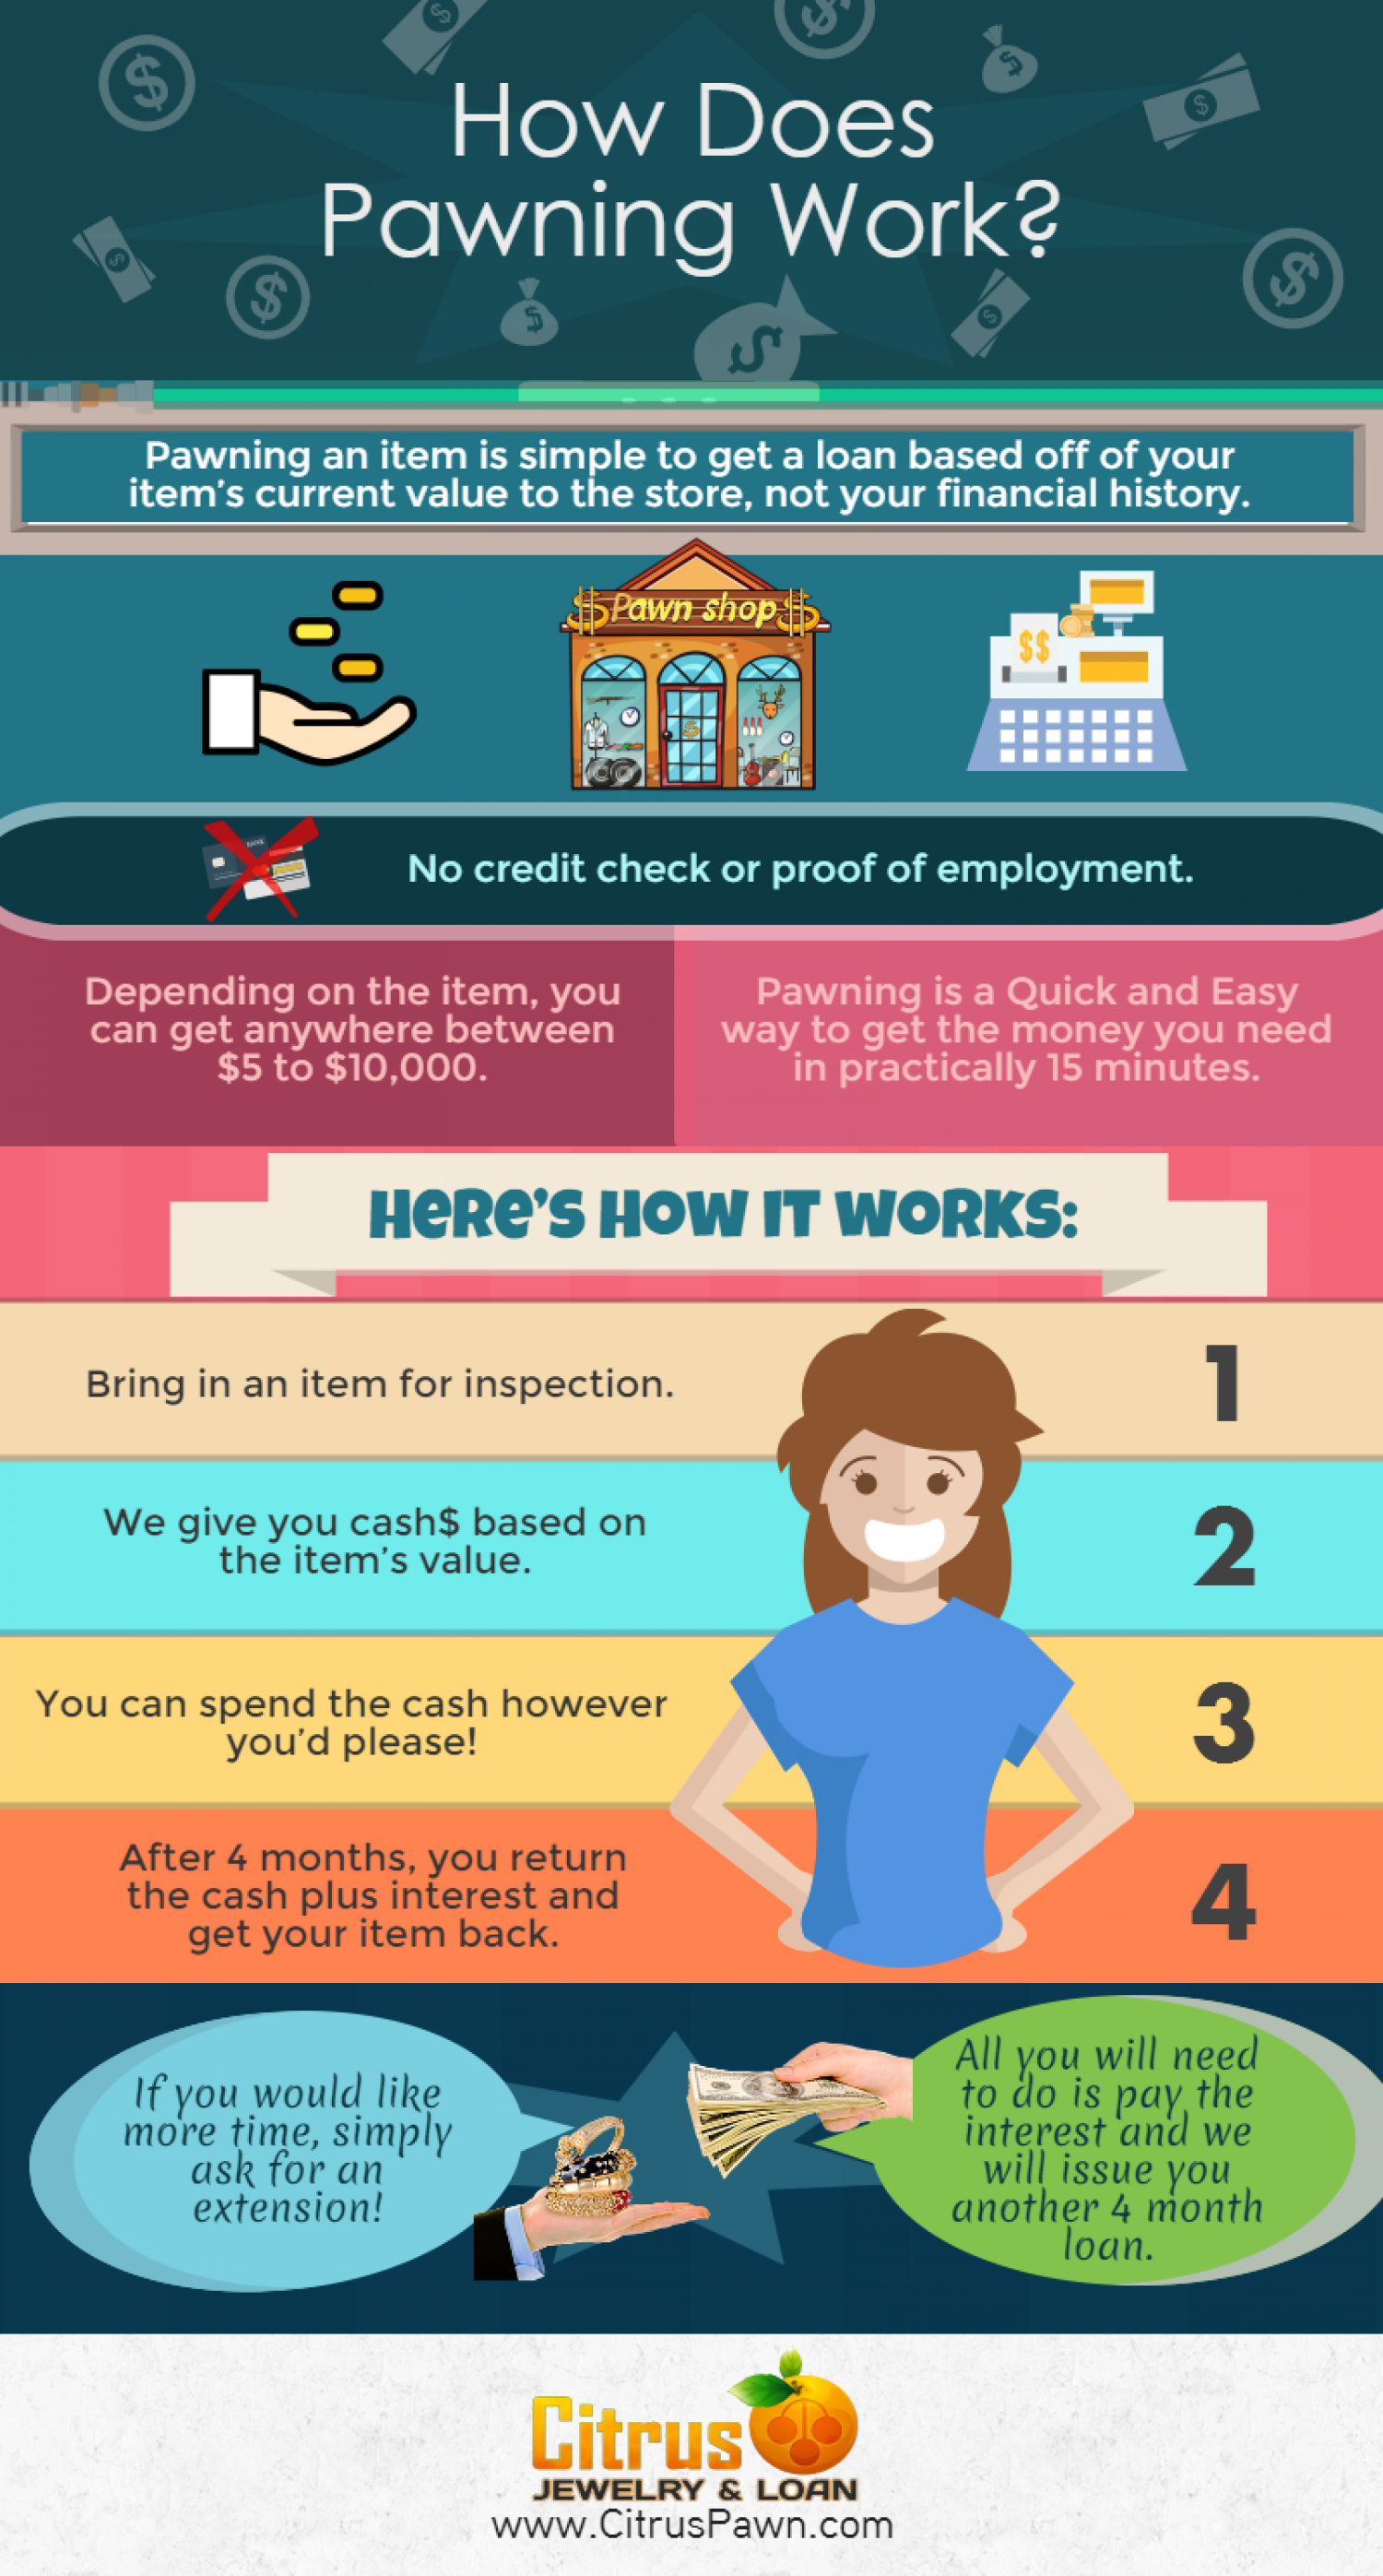 How Does Pawning Works? | Visual.ly